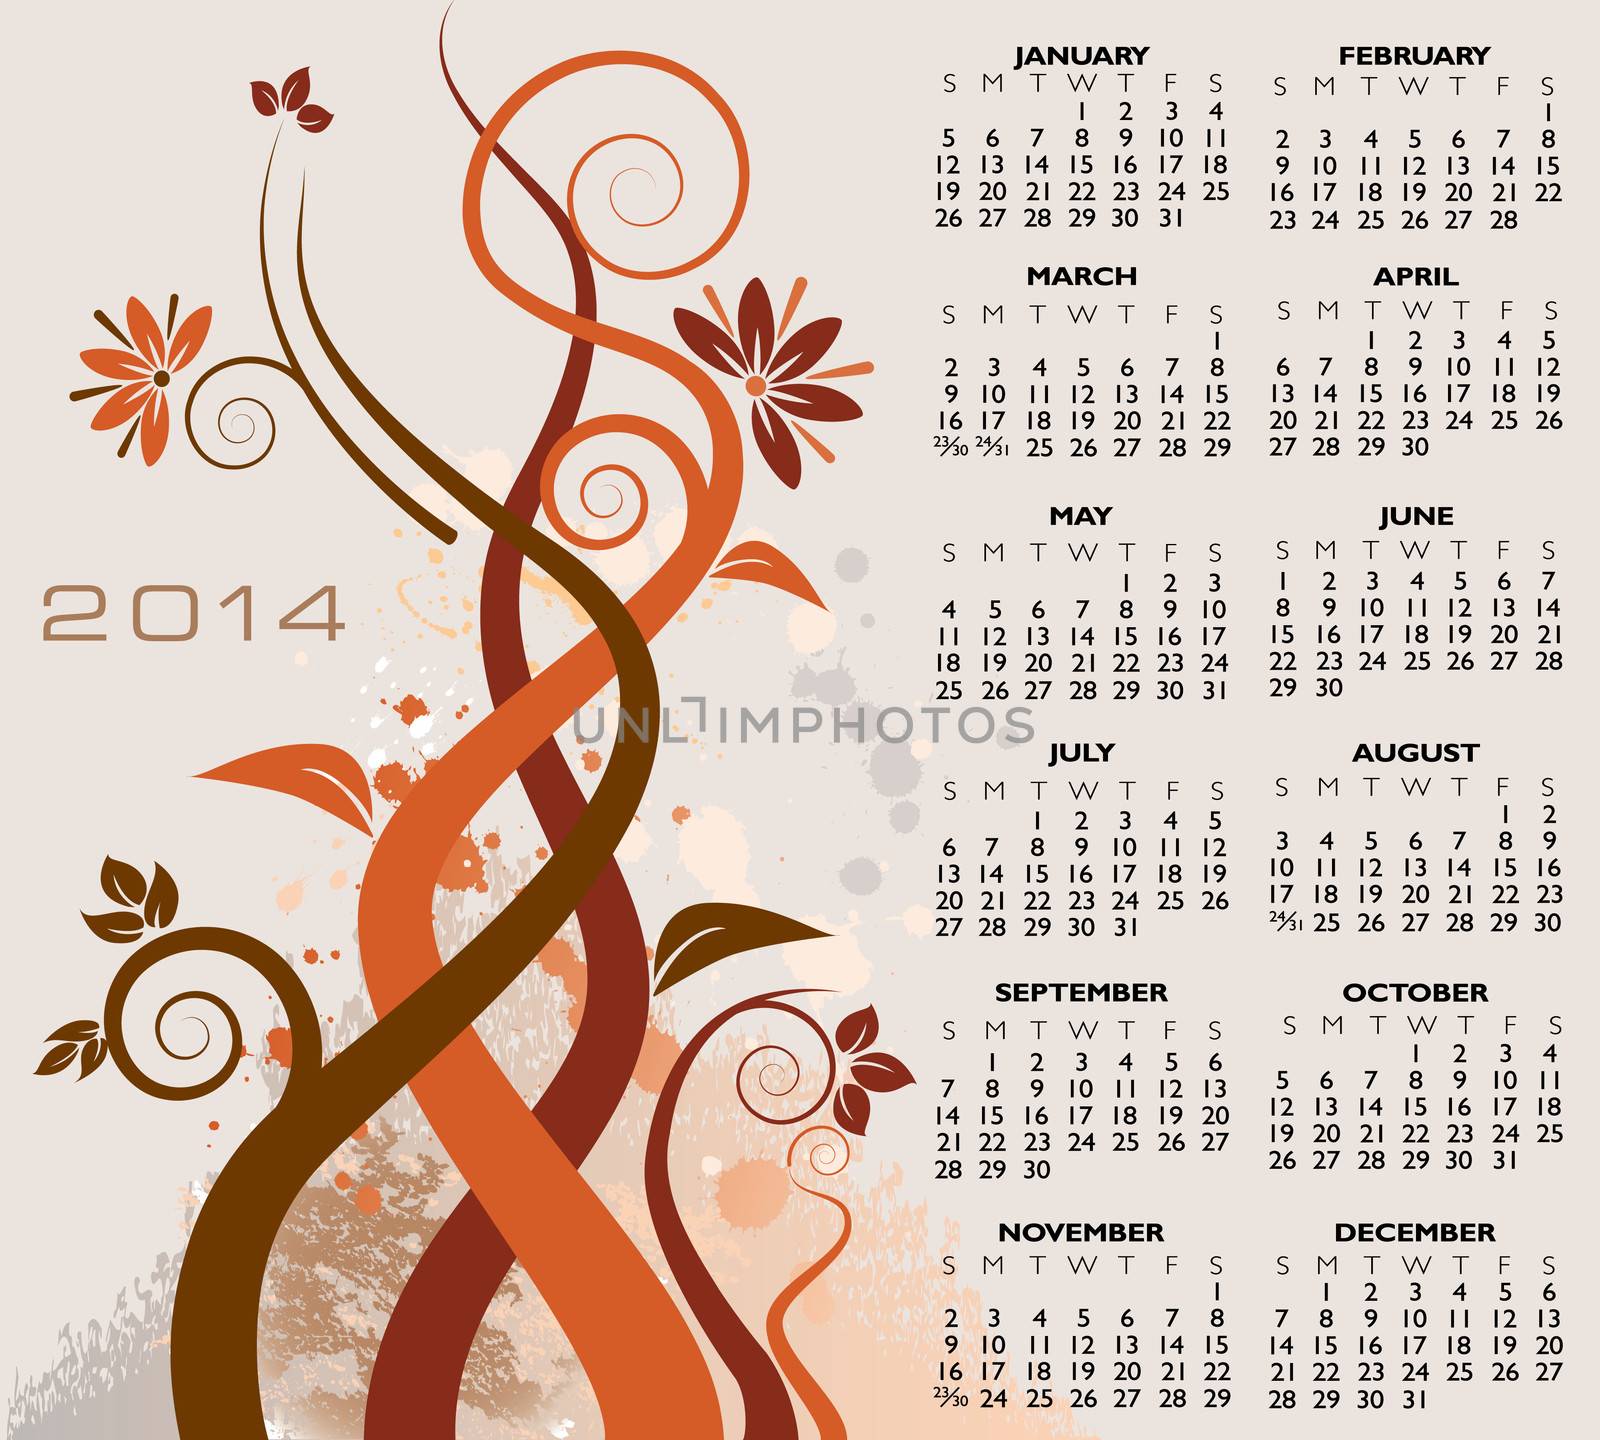 2014 Creative Floral Calendar by mike301